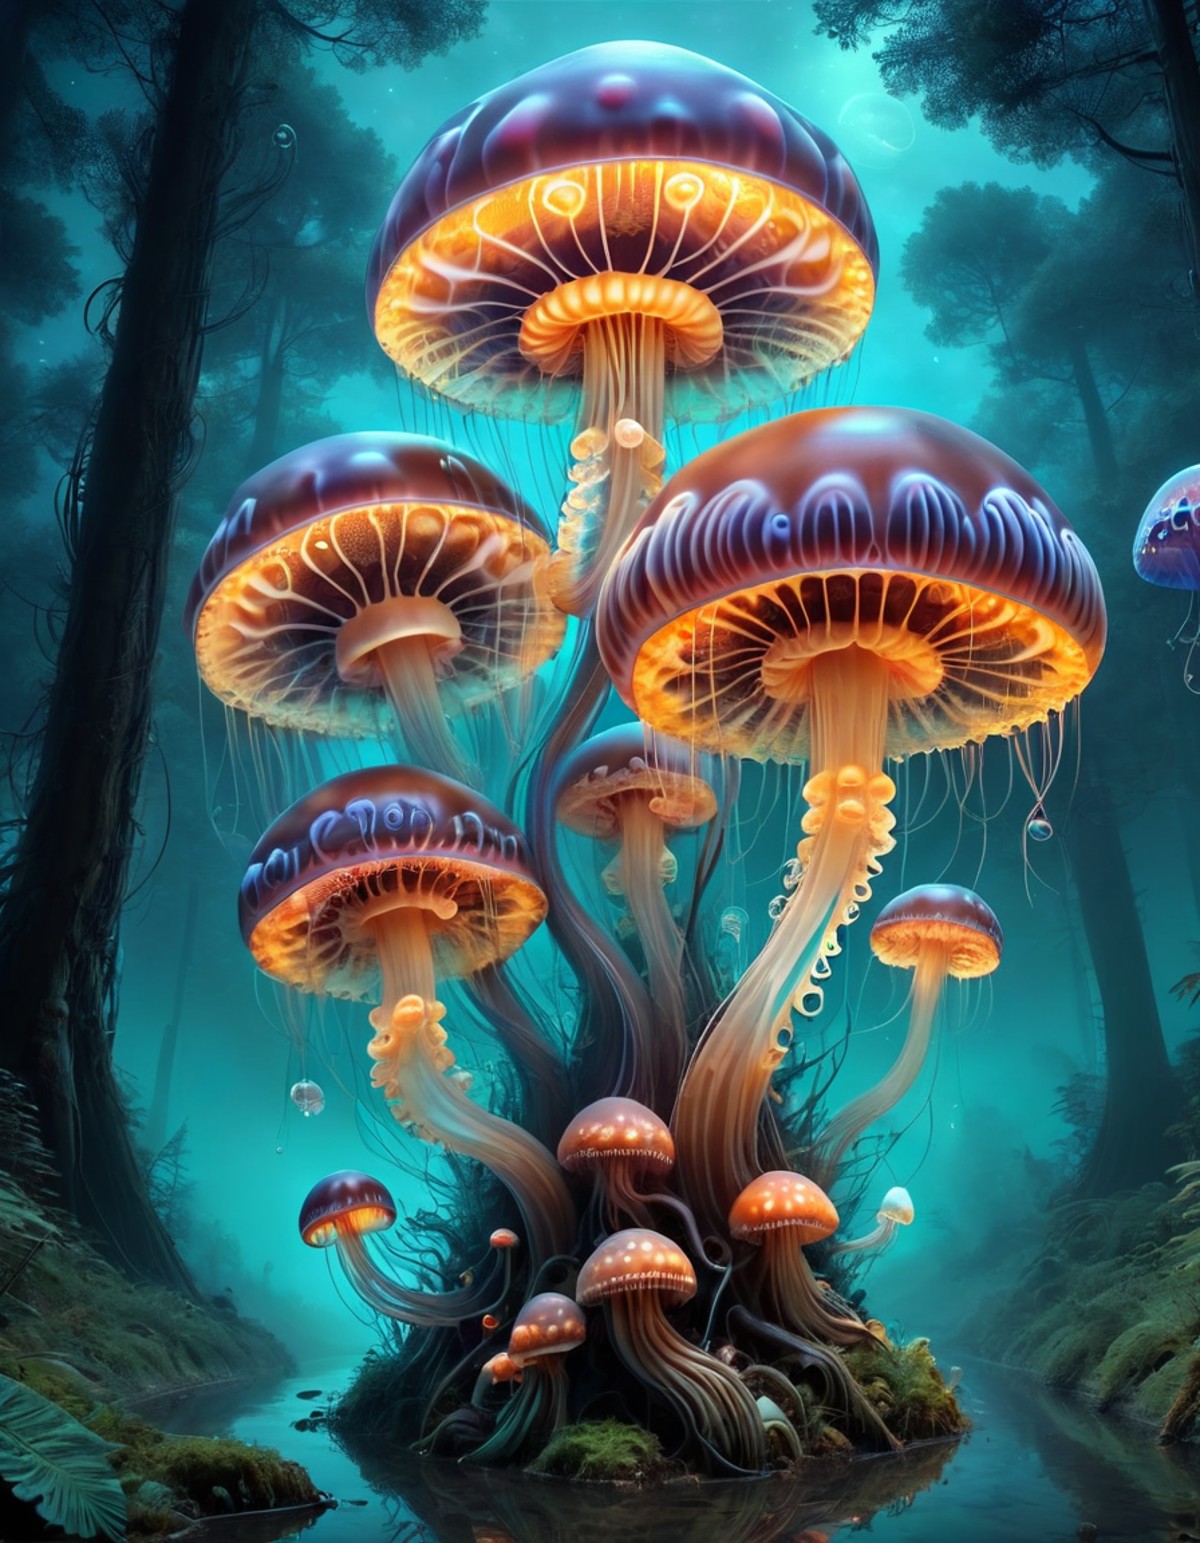 colorful slimey glowing jellyfish mushroom, nature, forest, outdoors, tree, walking, water, at night, bright sky <lora:ral...